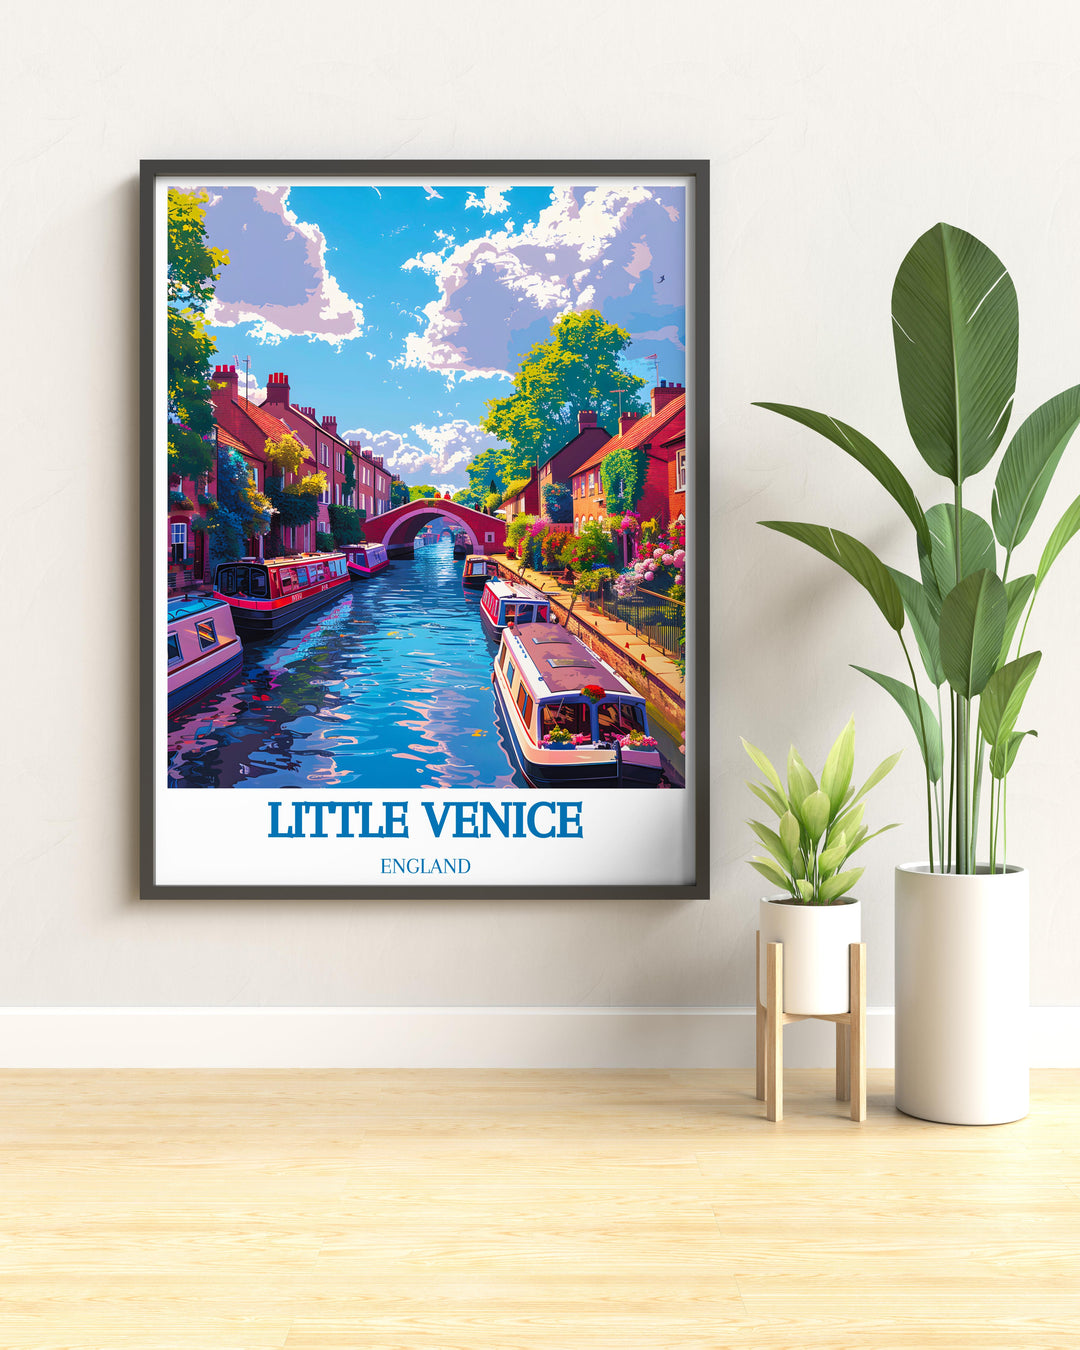 Print of Regents Canal in autumn, showcasing vibrant fall colors along the historic London canal.